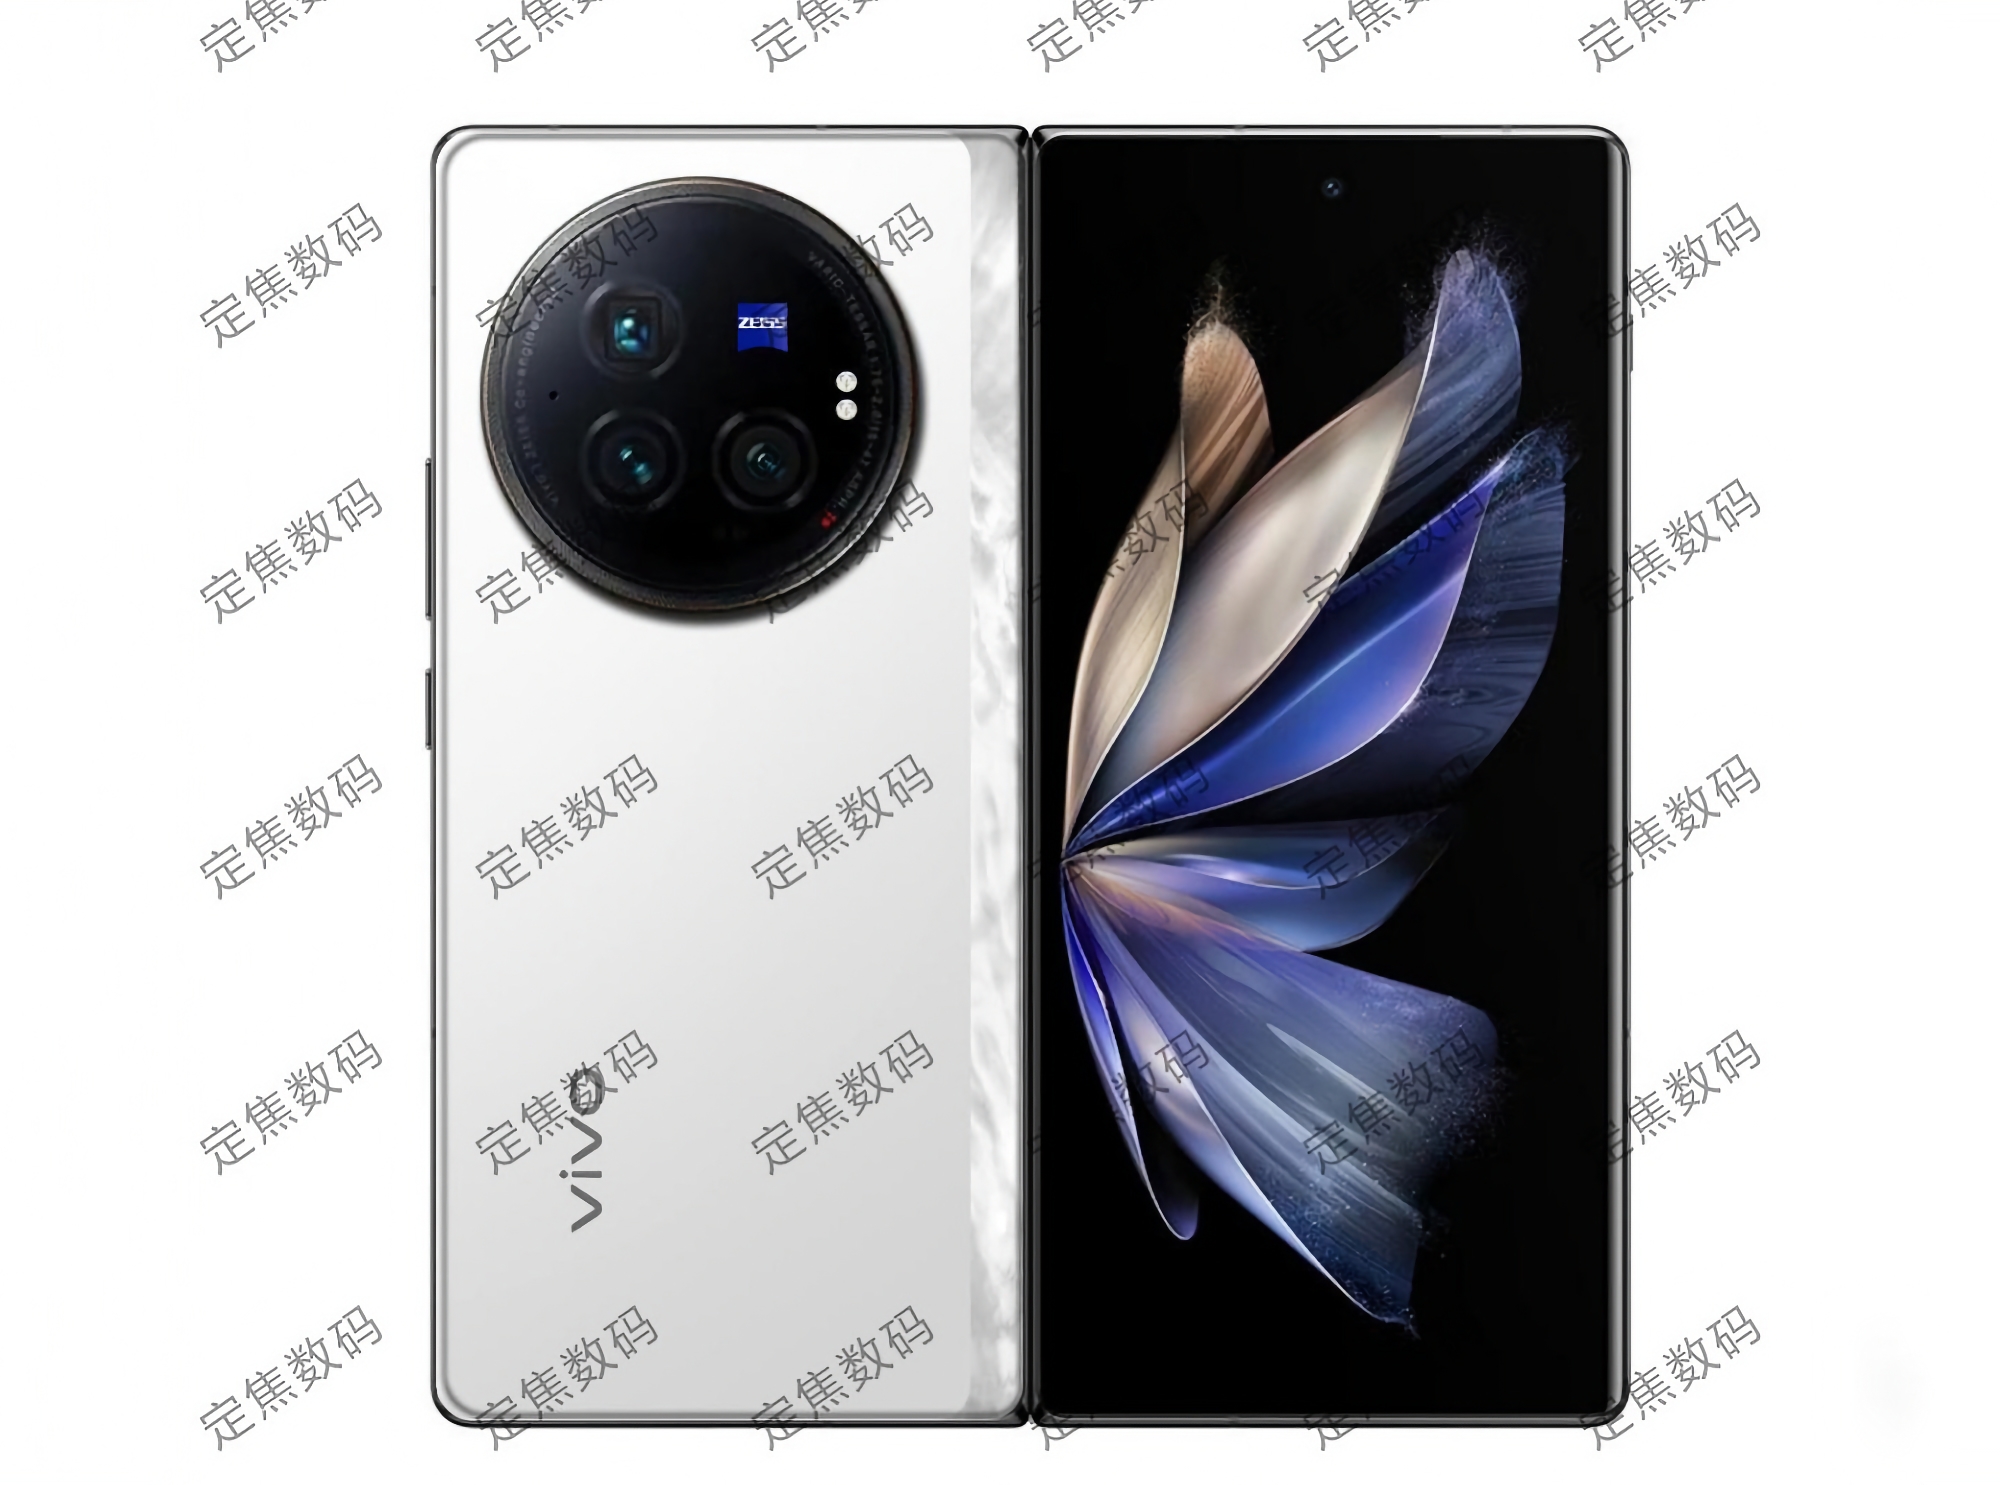 Here's what the vivo X Fold 3 Pro will look like: the company's new foldable smartphone with a Snapdragon 8 Gen 3 chip, dual screens and a 5,800mAh battery